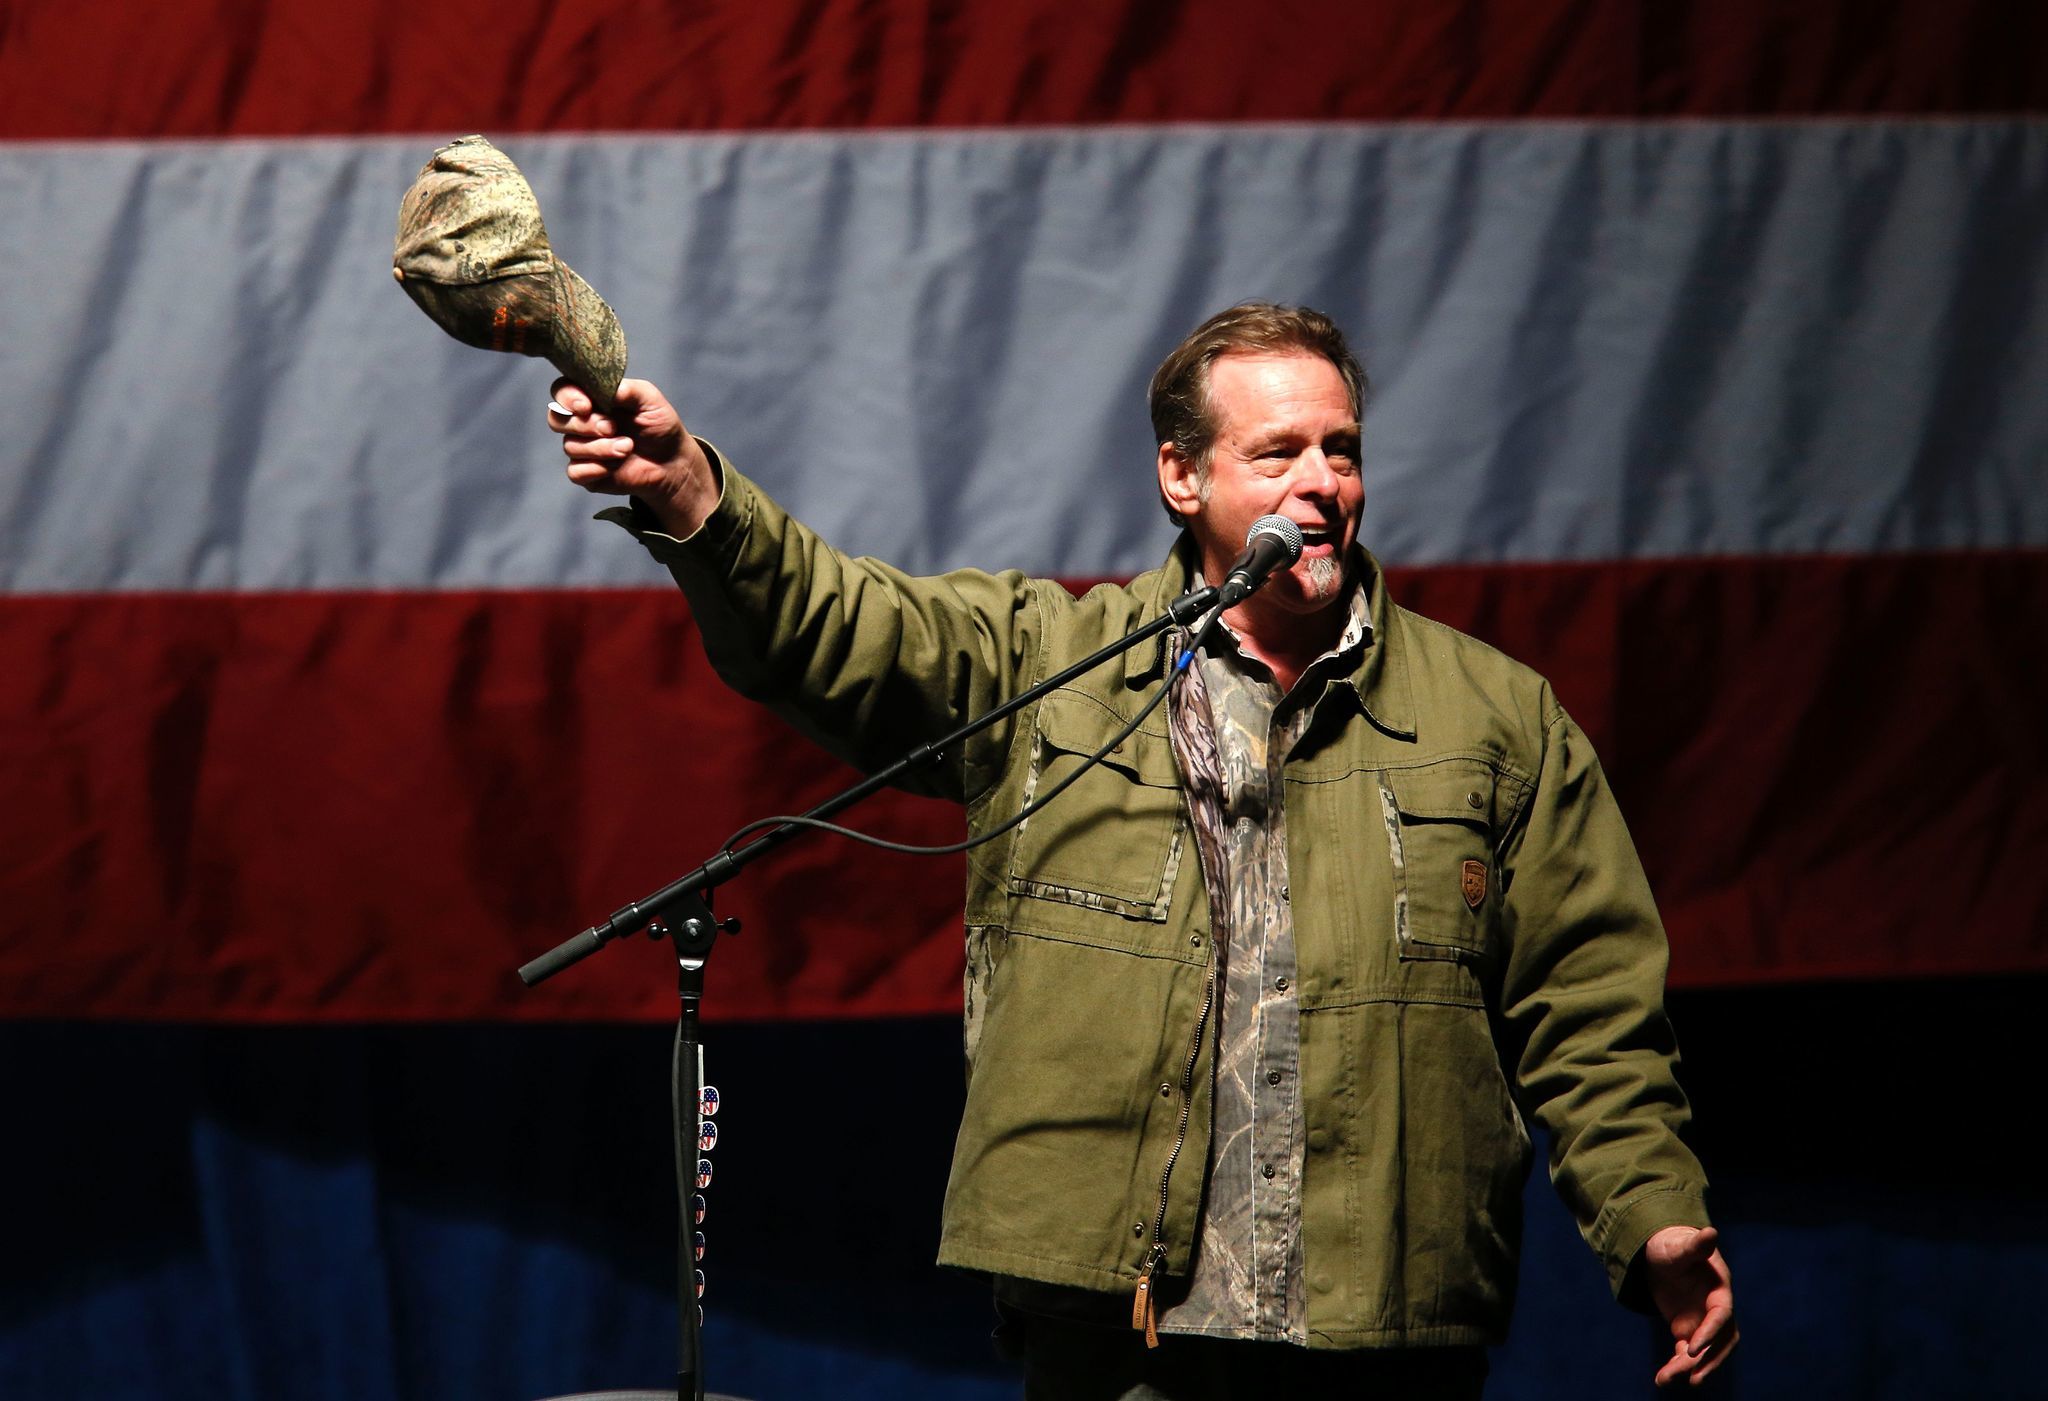 Ted Nugent sings the national anthem before Donald Trump addresses supporters at Freedom Hill Amphitheater on Nov. 6.